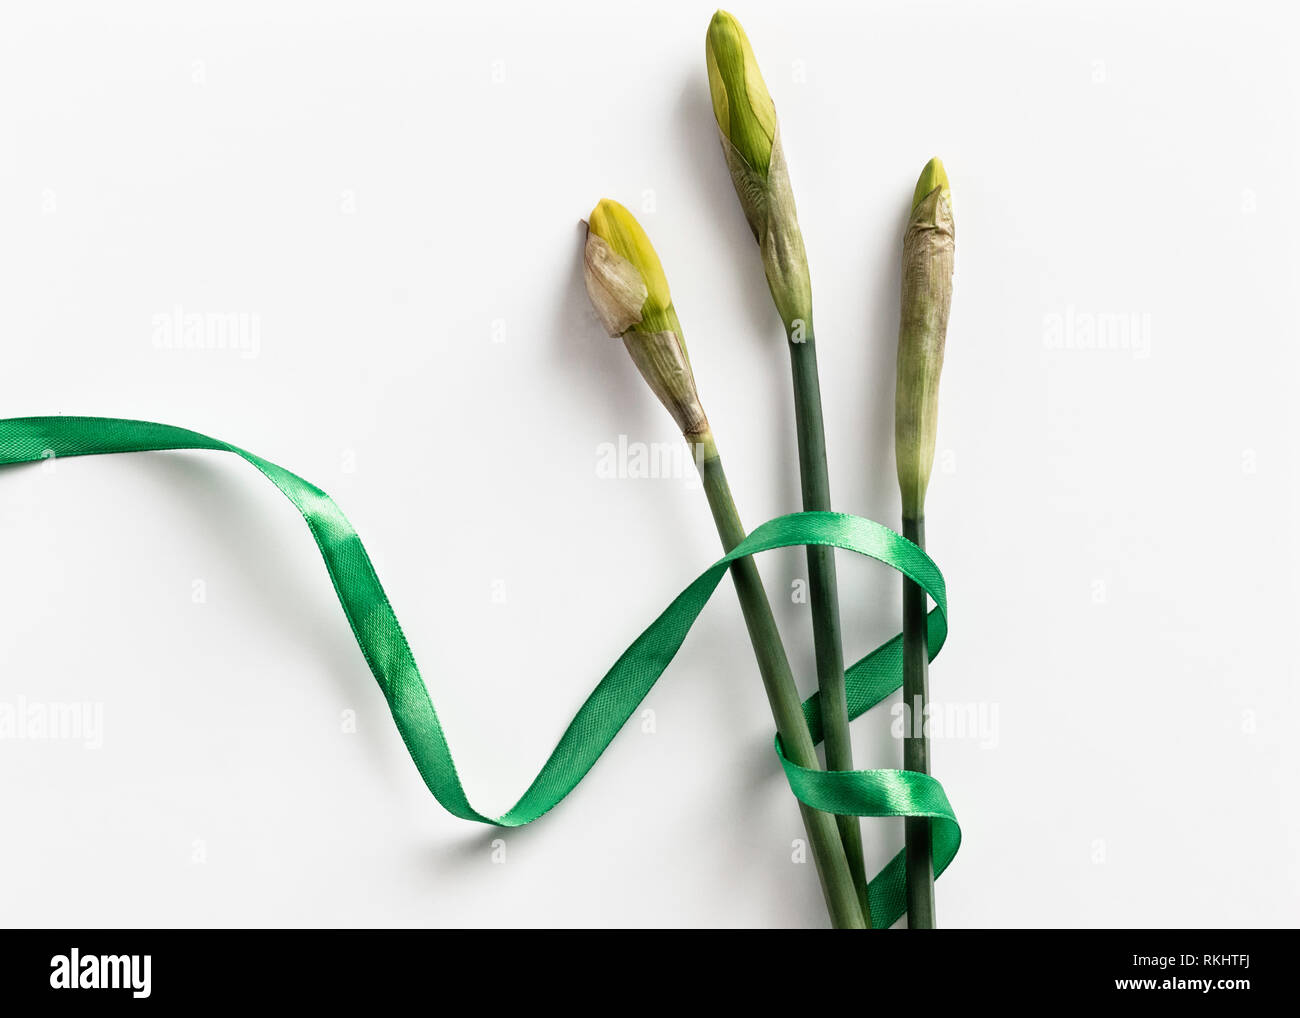 Flat lay image of three daffodil flowers on a white background tied with a green ribbon. Stock Photo